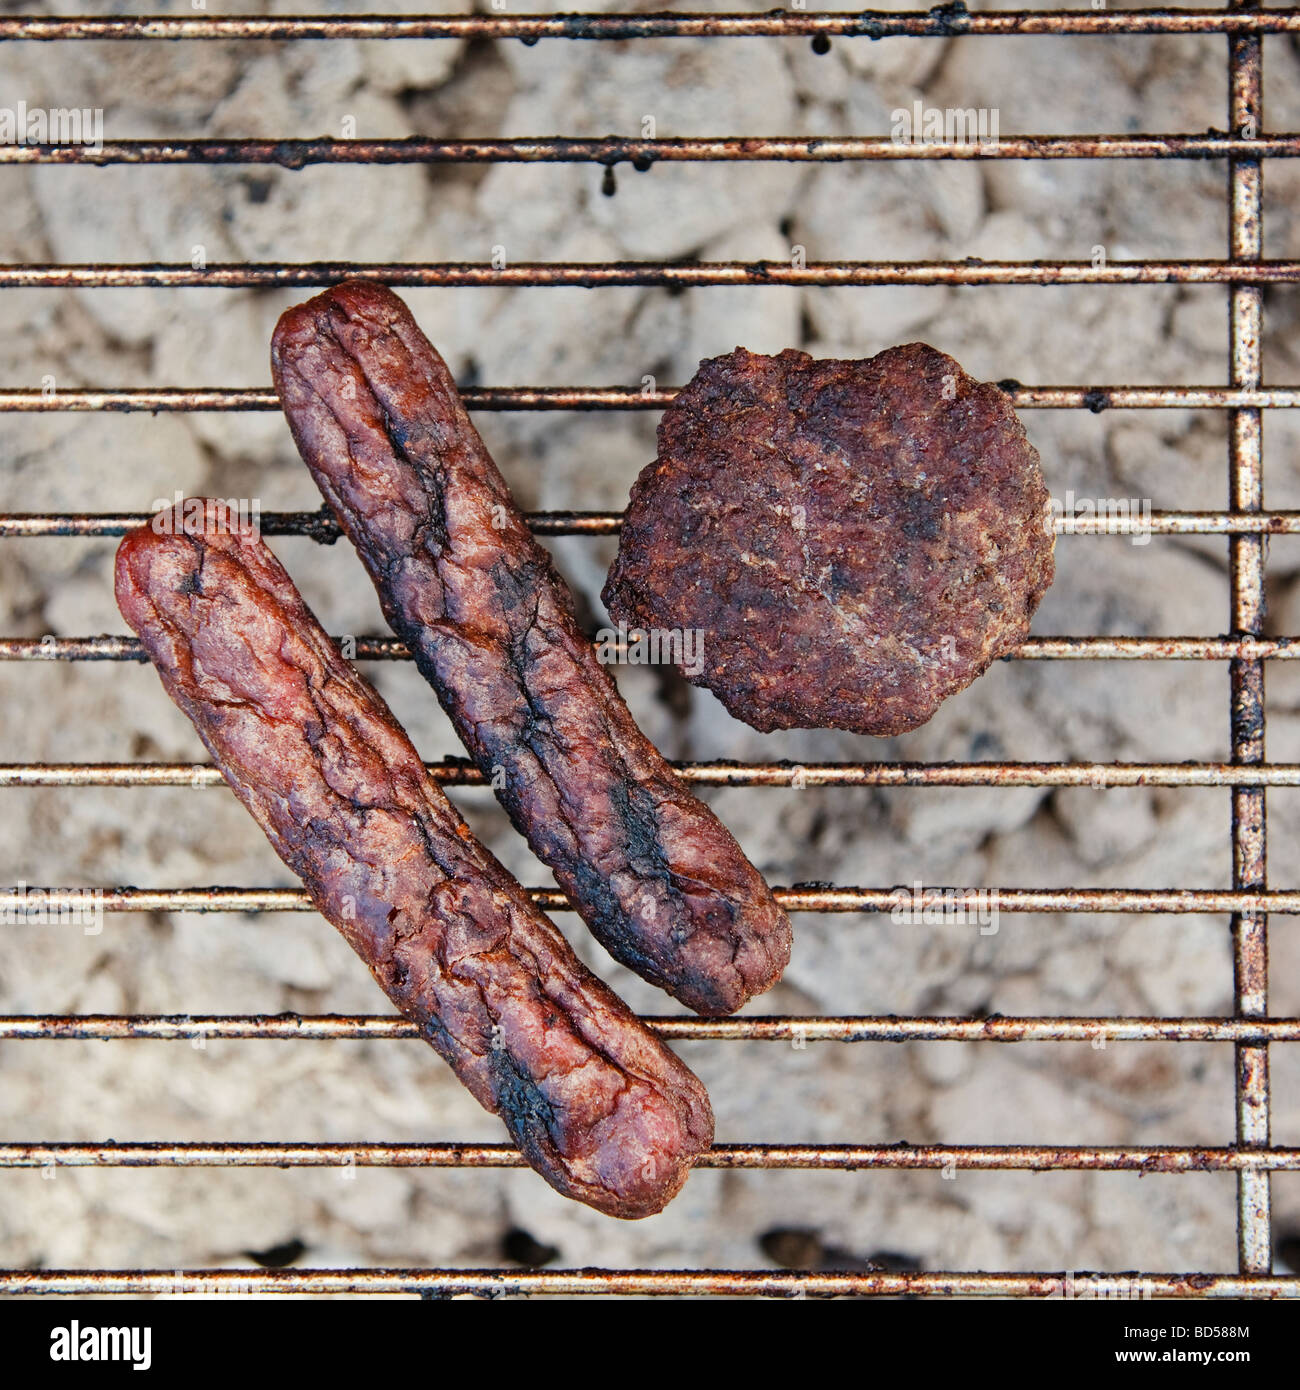 Burnt wieners and a burger on a barbeque Stock Photo